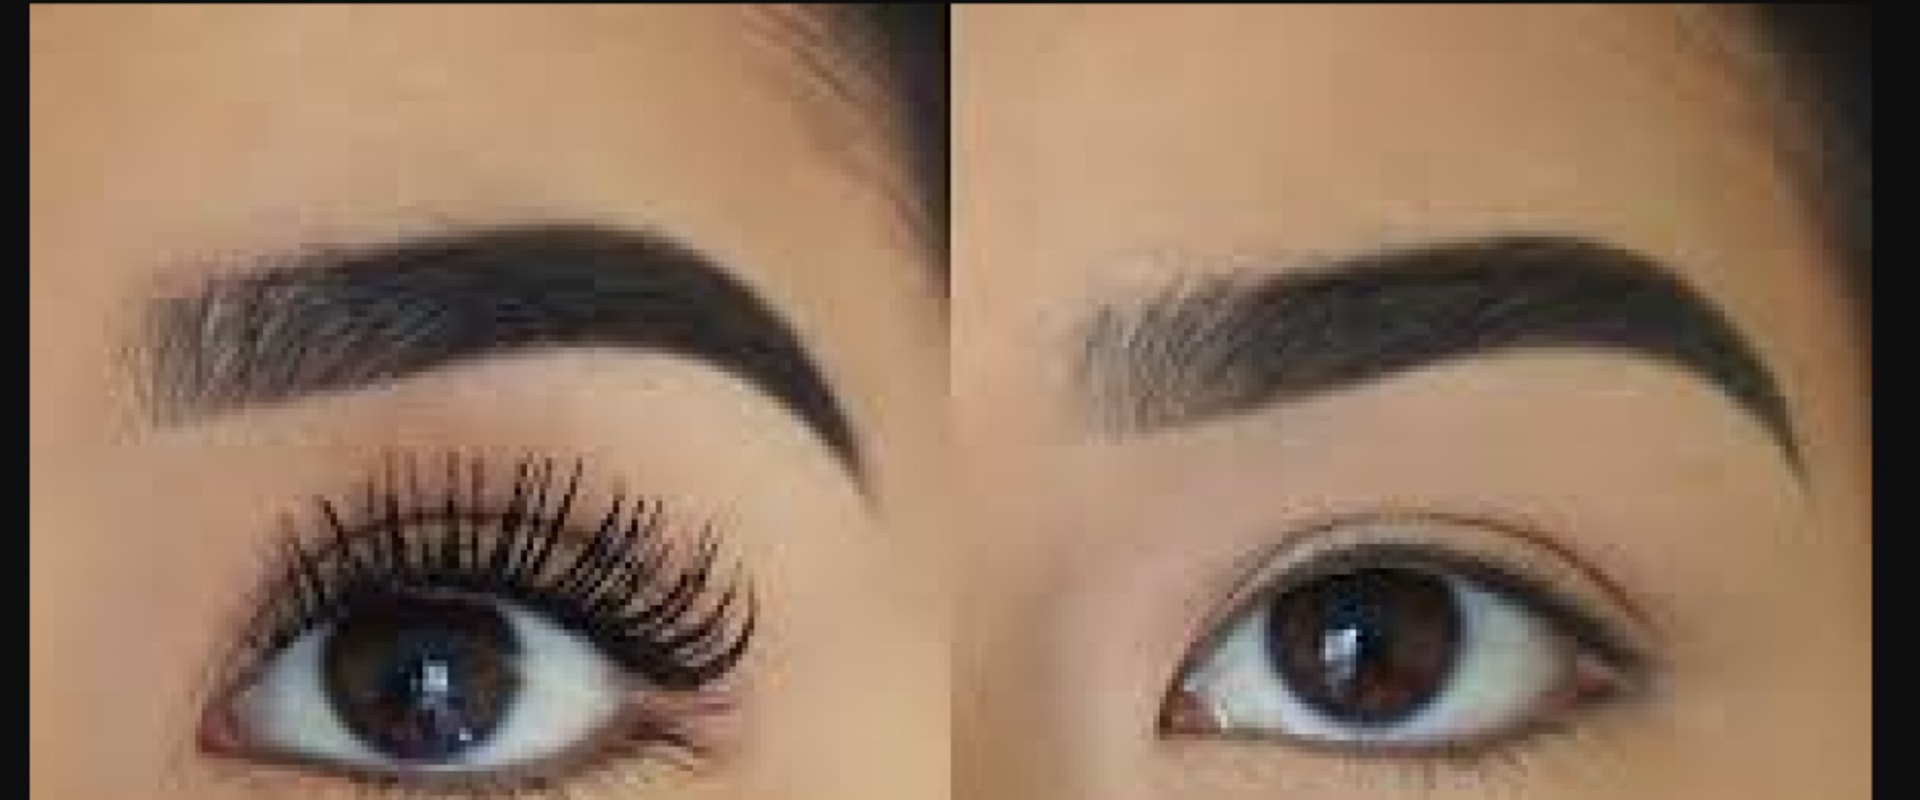 What kind of eyelashes are attractive?